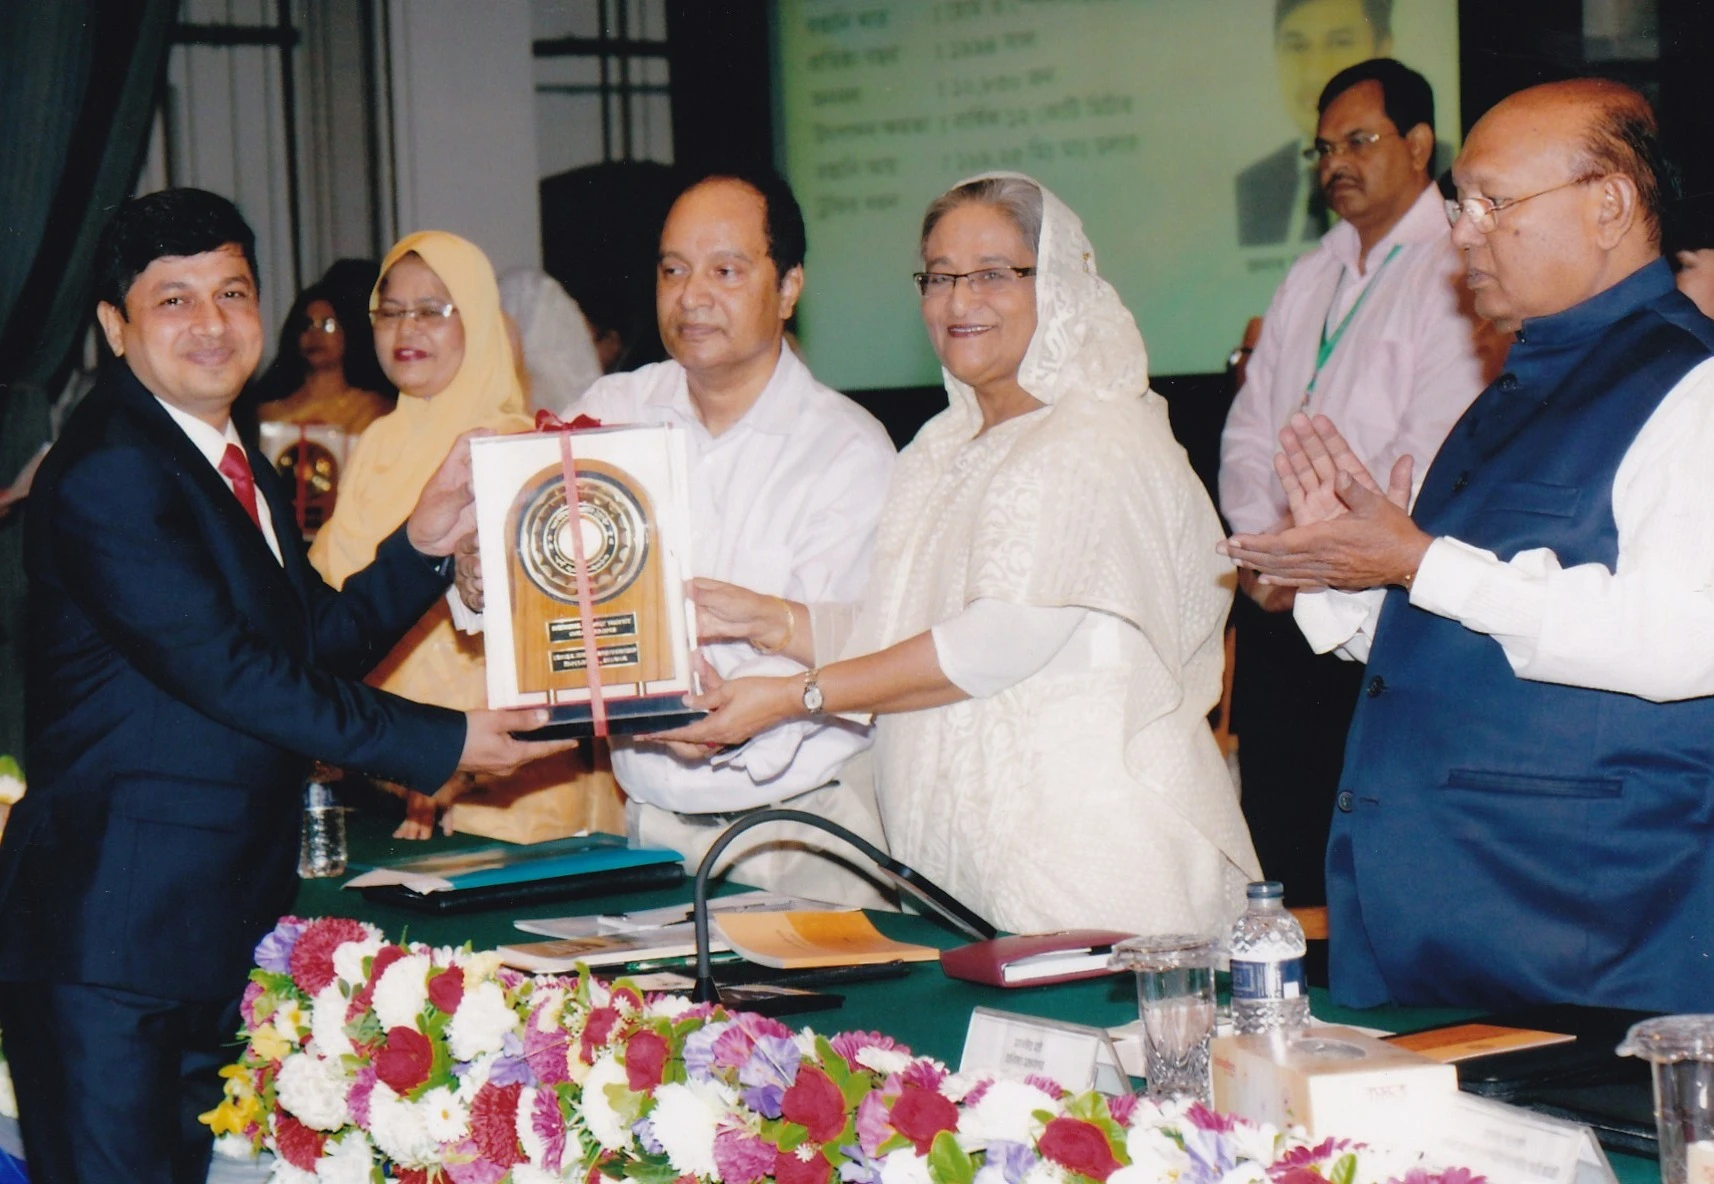 Proudly received the award from Prime Minister Sheikh Hasina